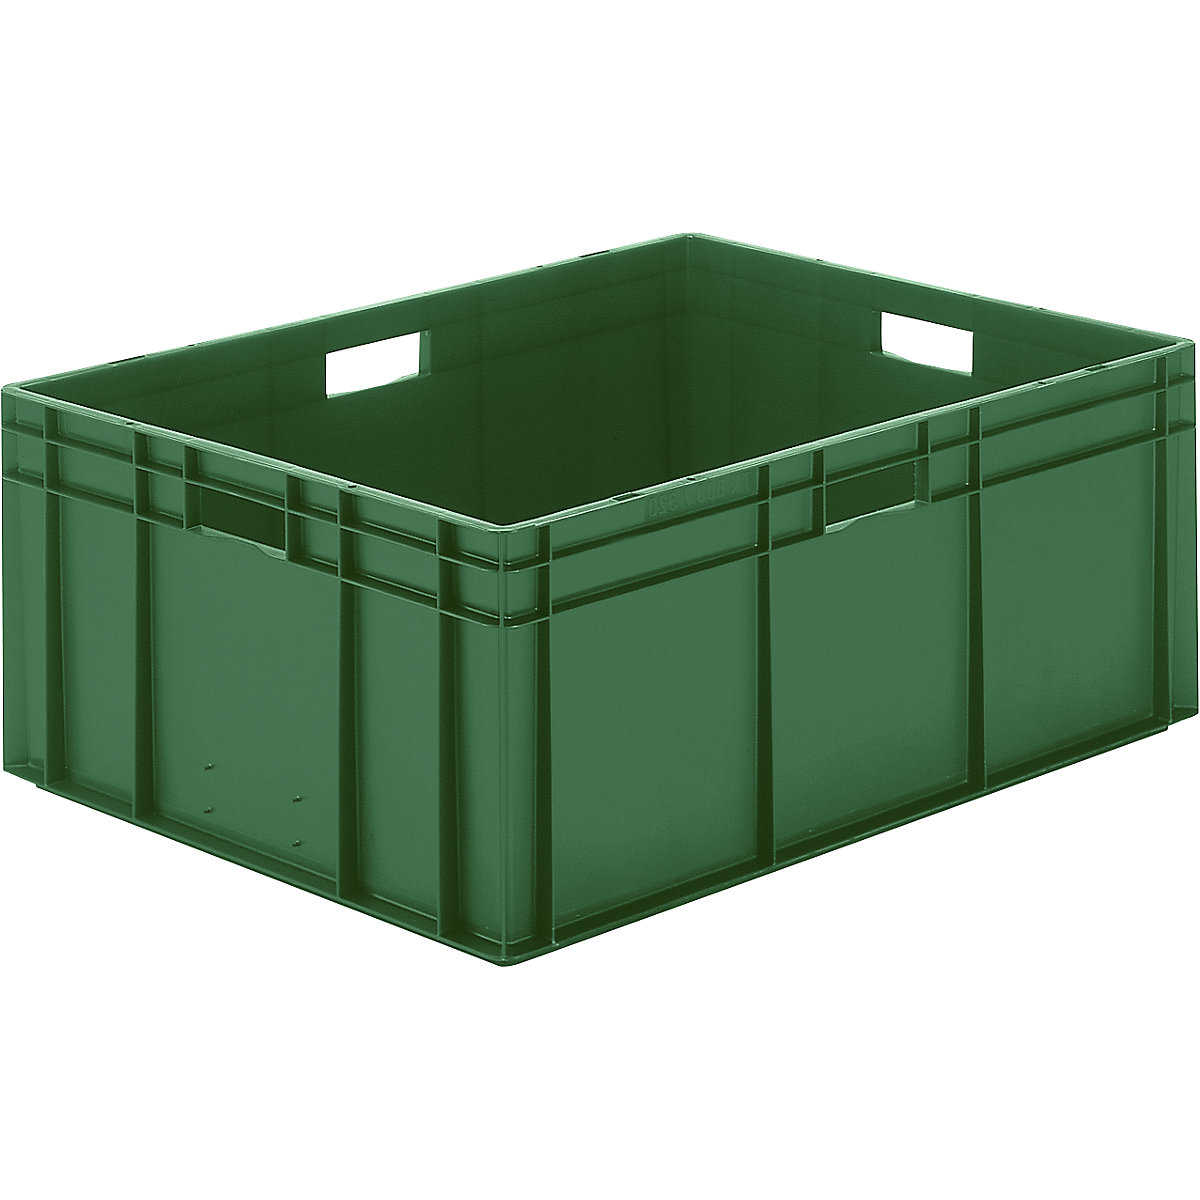 Euro stacking container, closed walls and base, LxWxH 800 x 600 x 320 mm, green, pack of 2-6